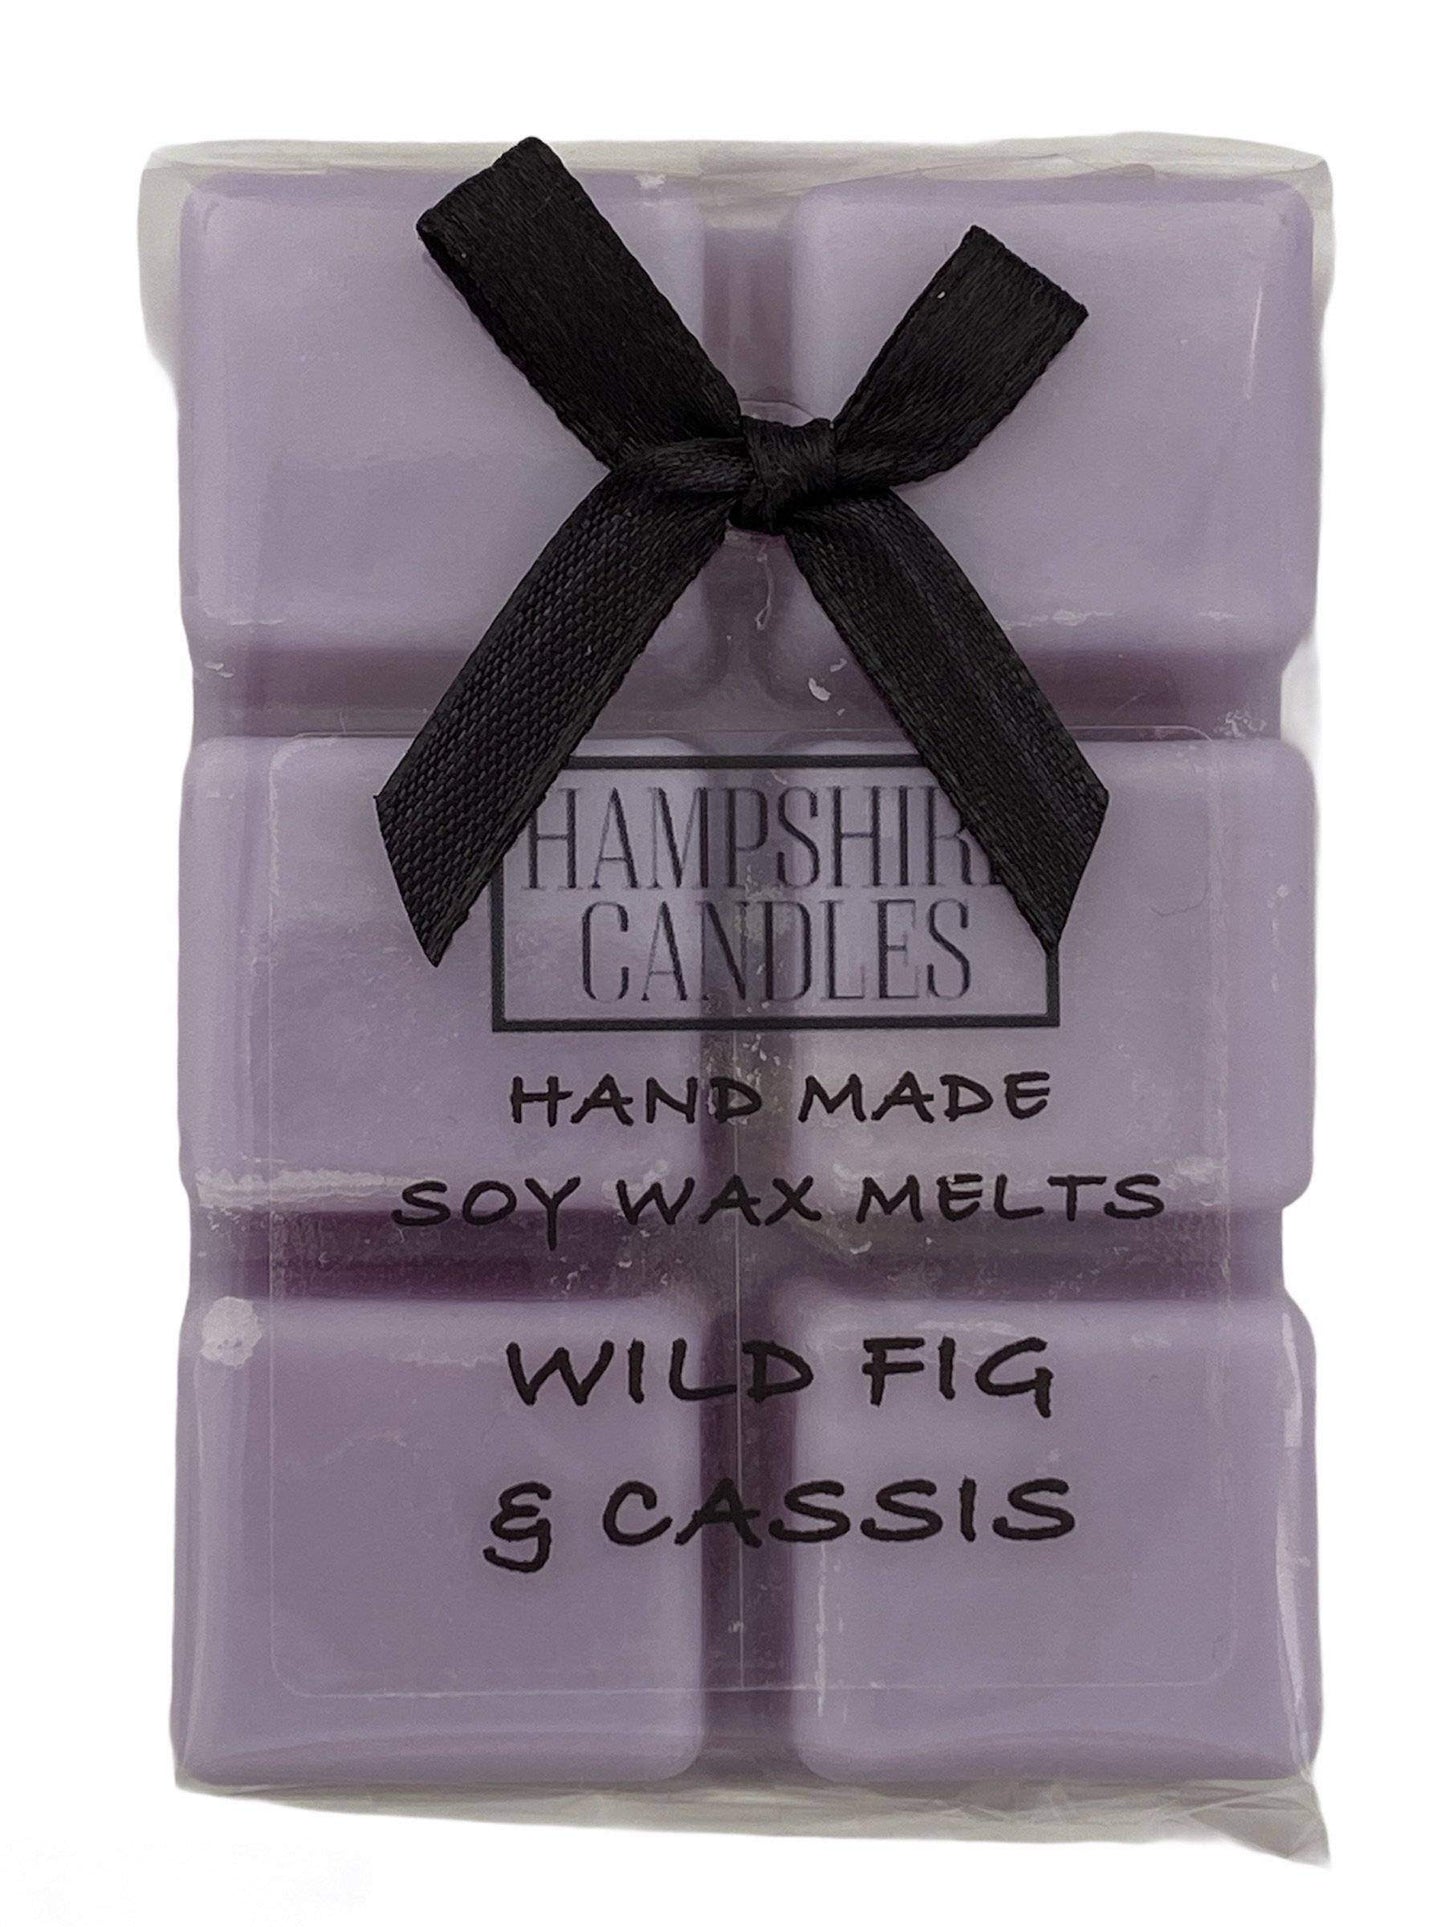 Wild Fig and Cassis Wax Melts-FREE Shipping over £35.00-